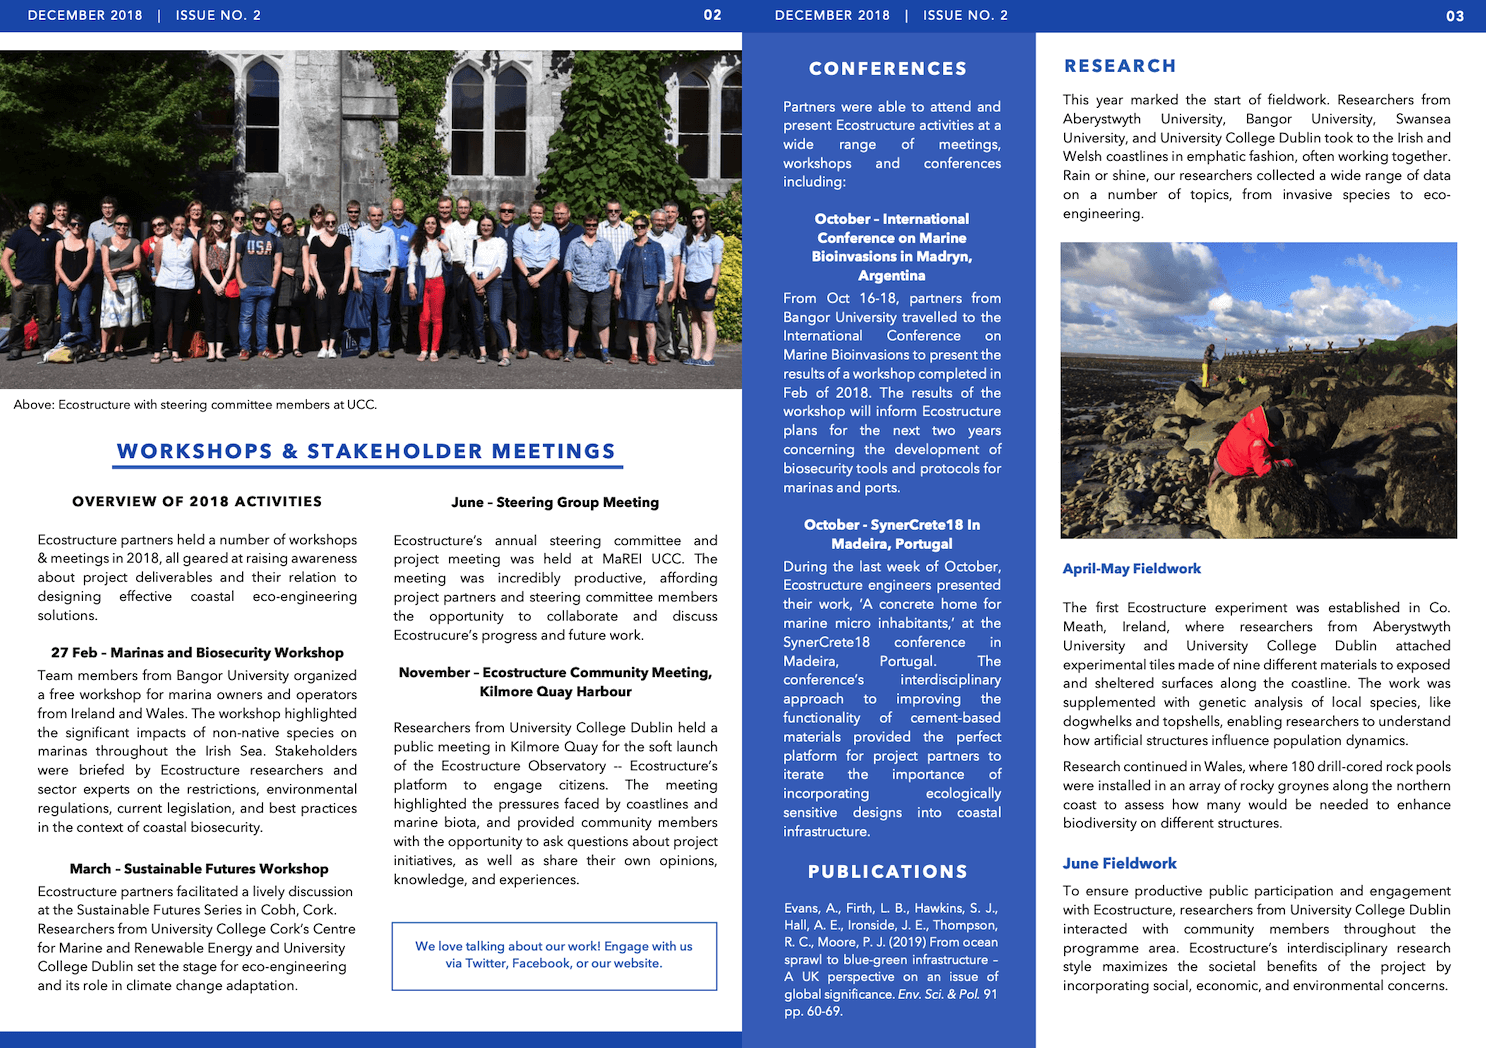 The 2017 Ecostructure project newsletter, describing eco-engineering and biosecurity research.